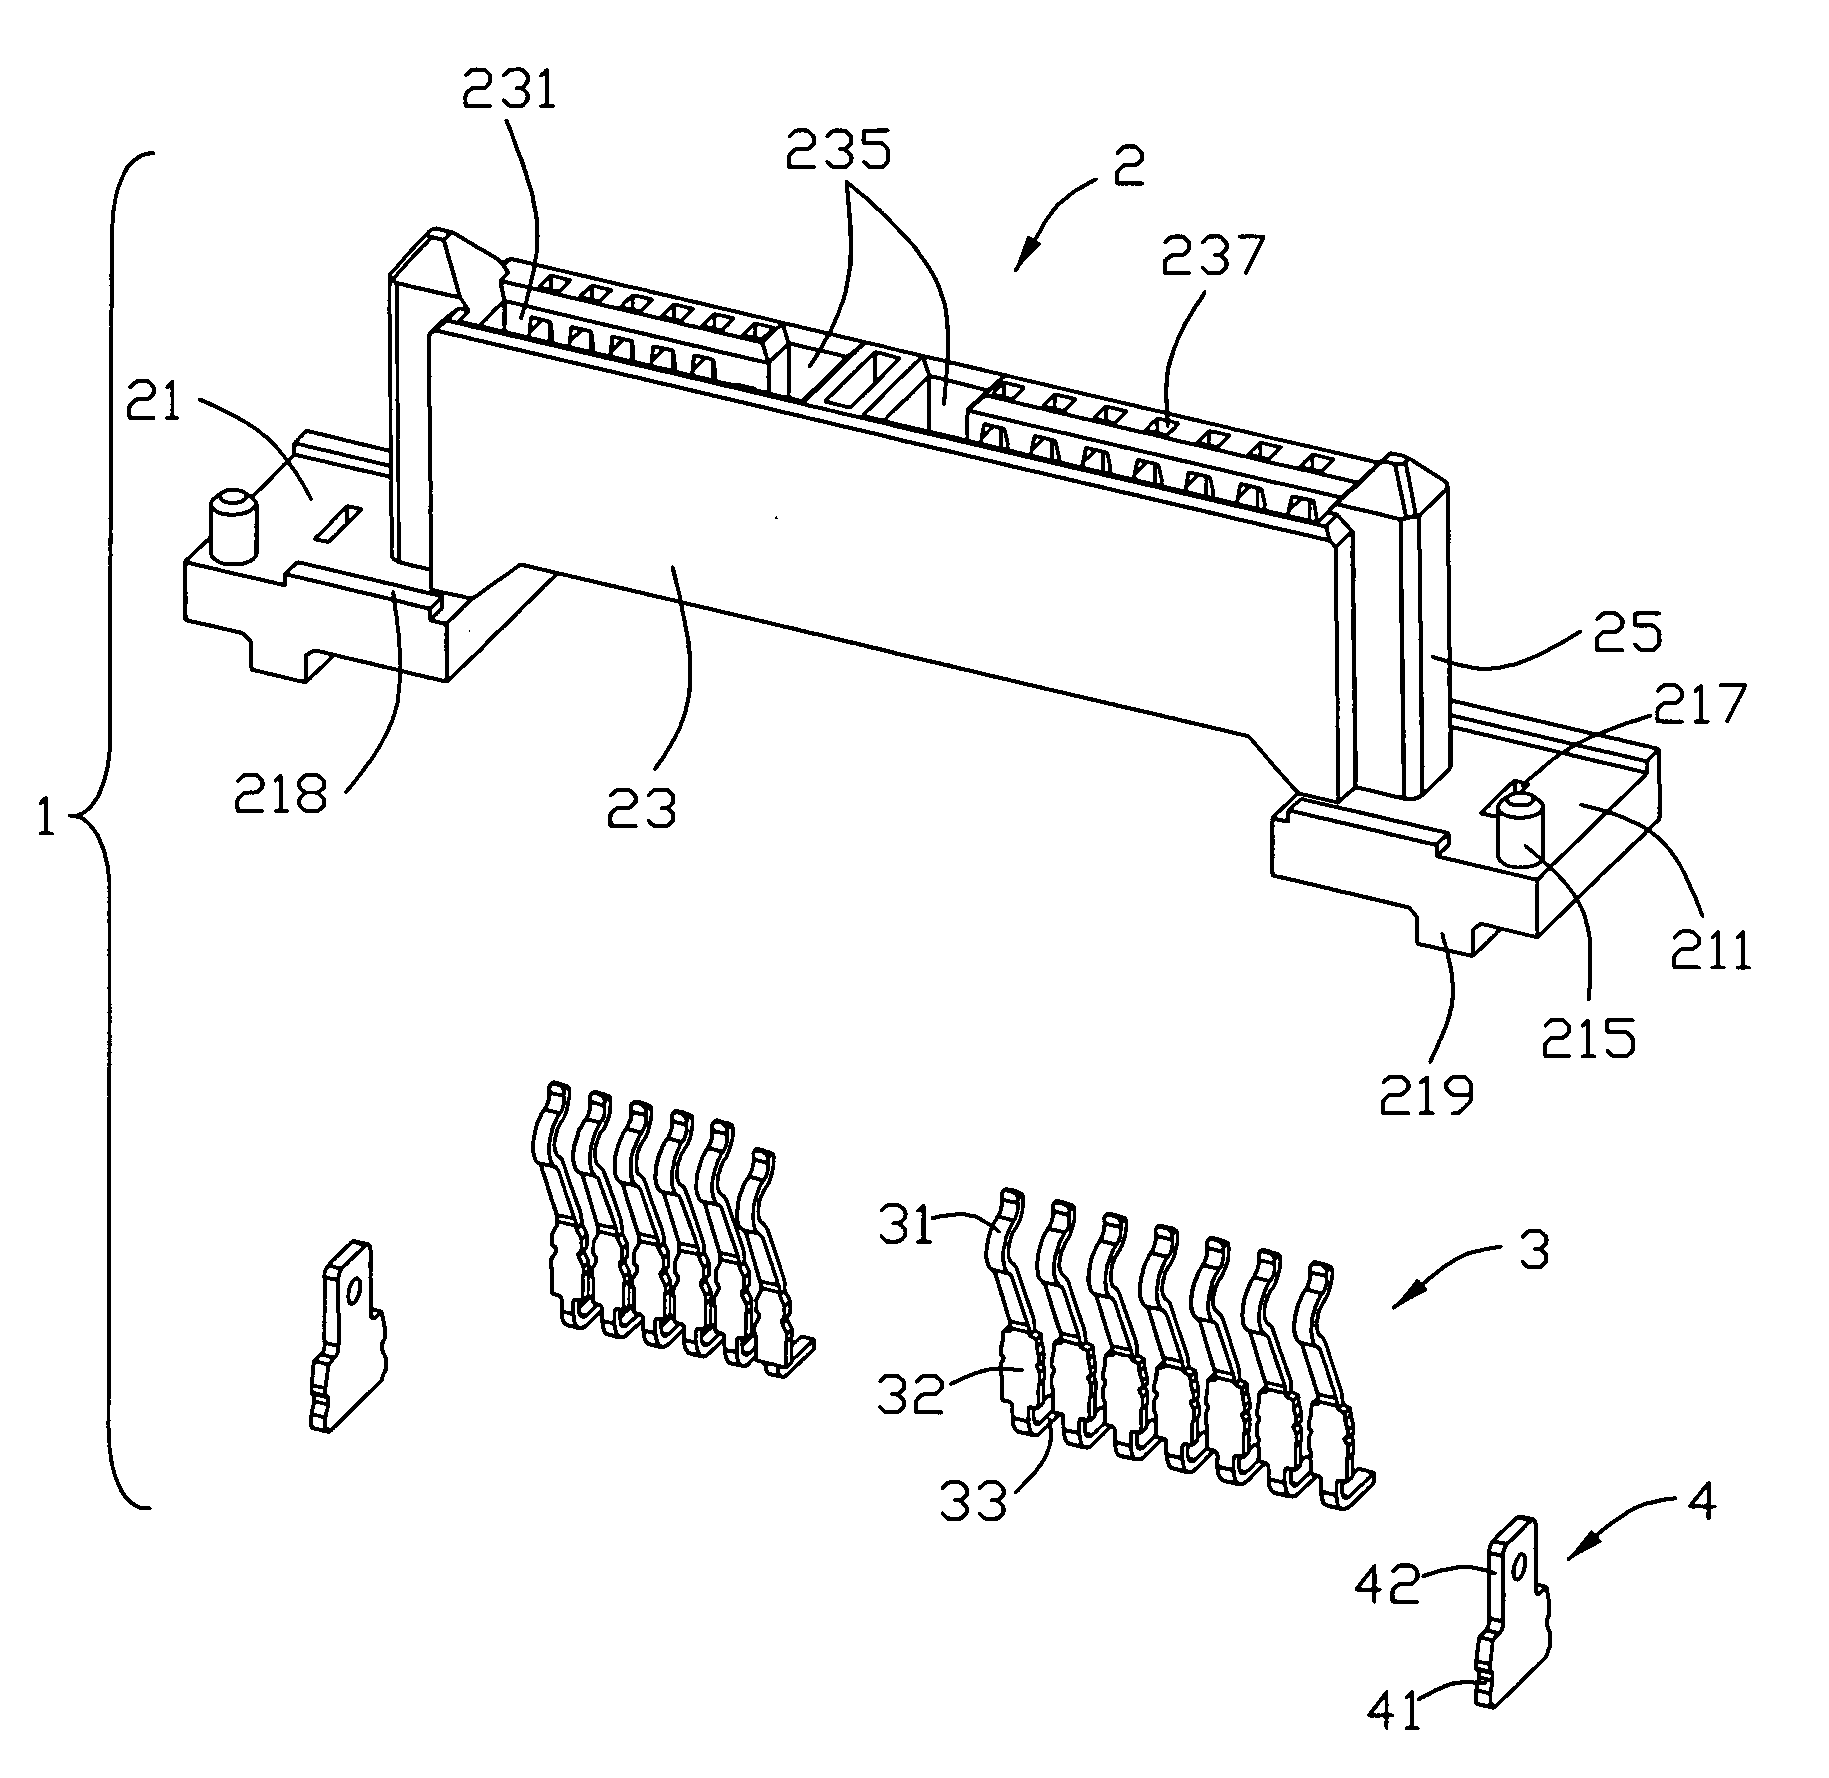 Electrical connector having low broad mounting profile